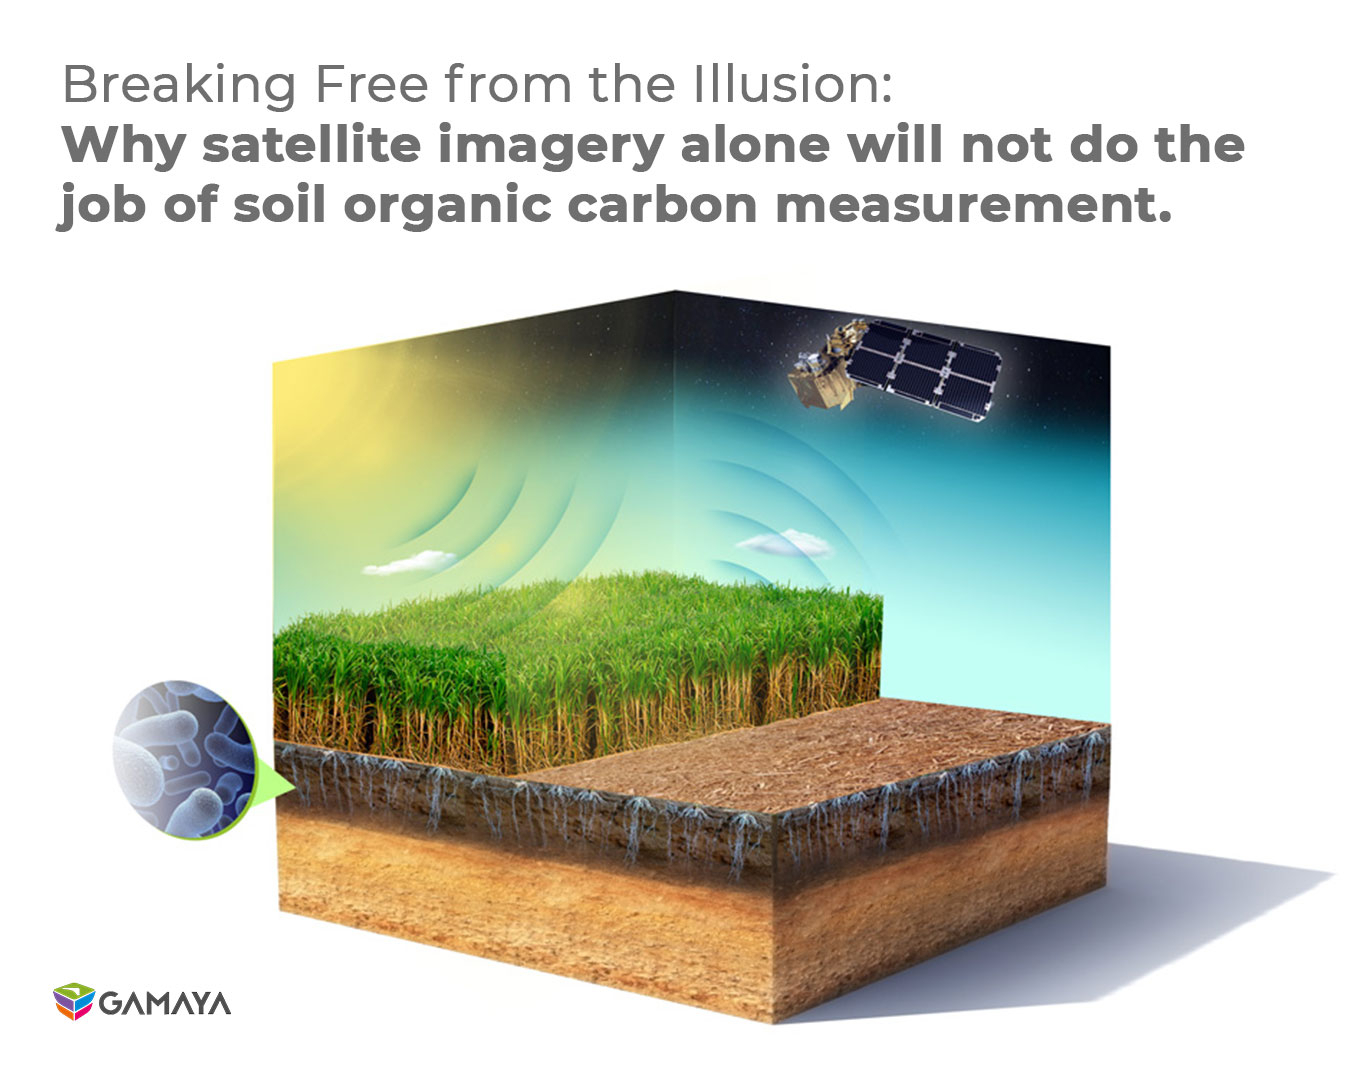 Breaking Free from the Illusion: Why satellite imagery alone will not do the job of soil organic carbon measurement.